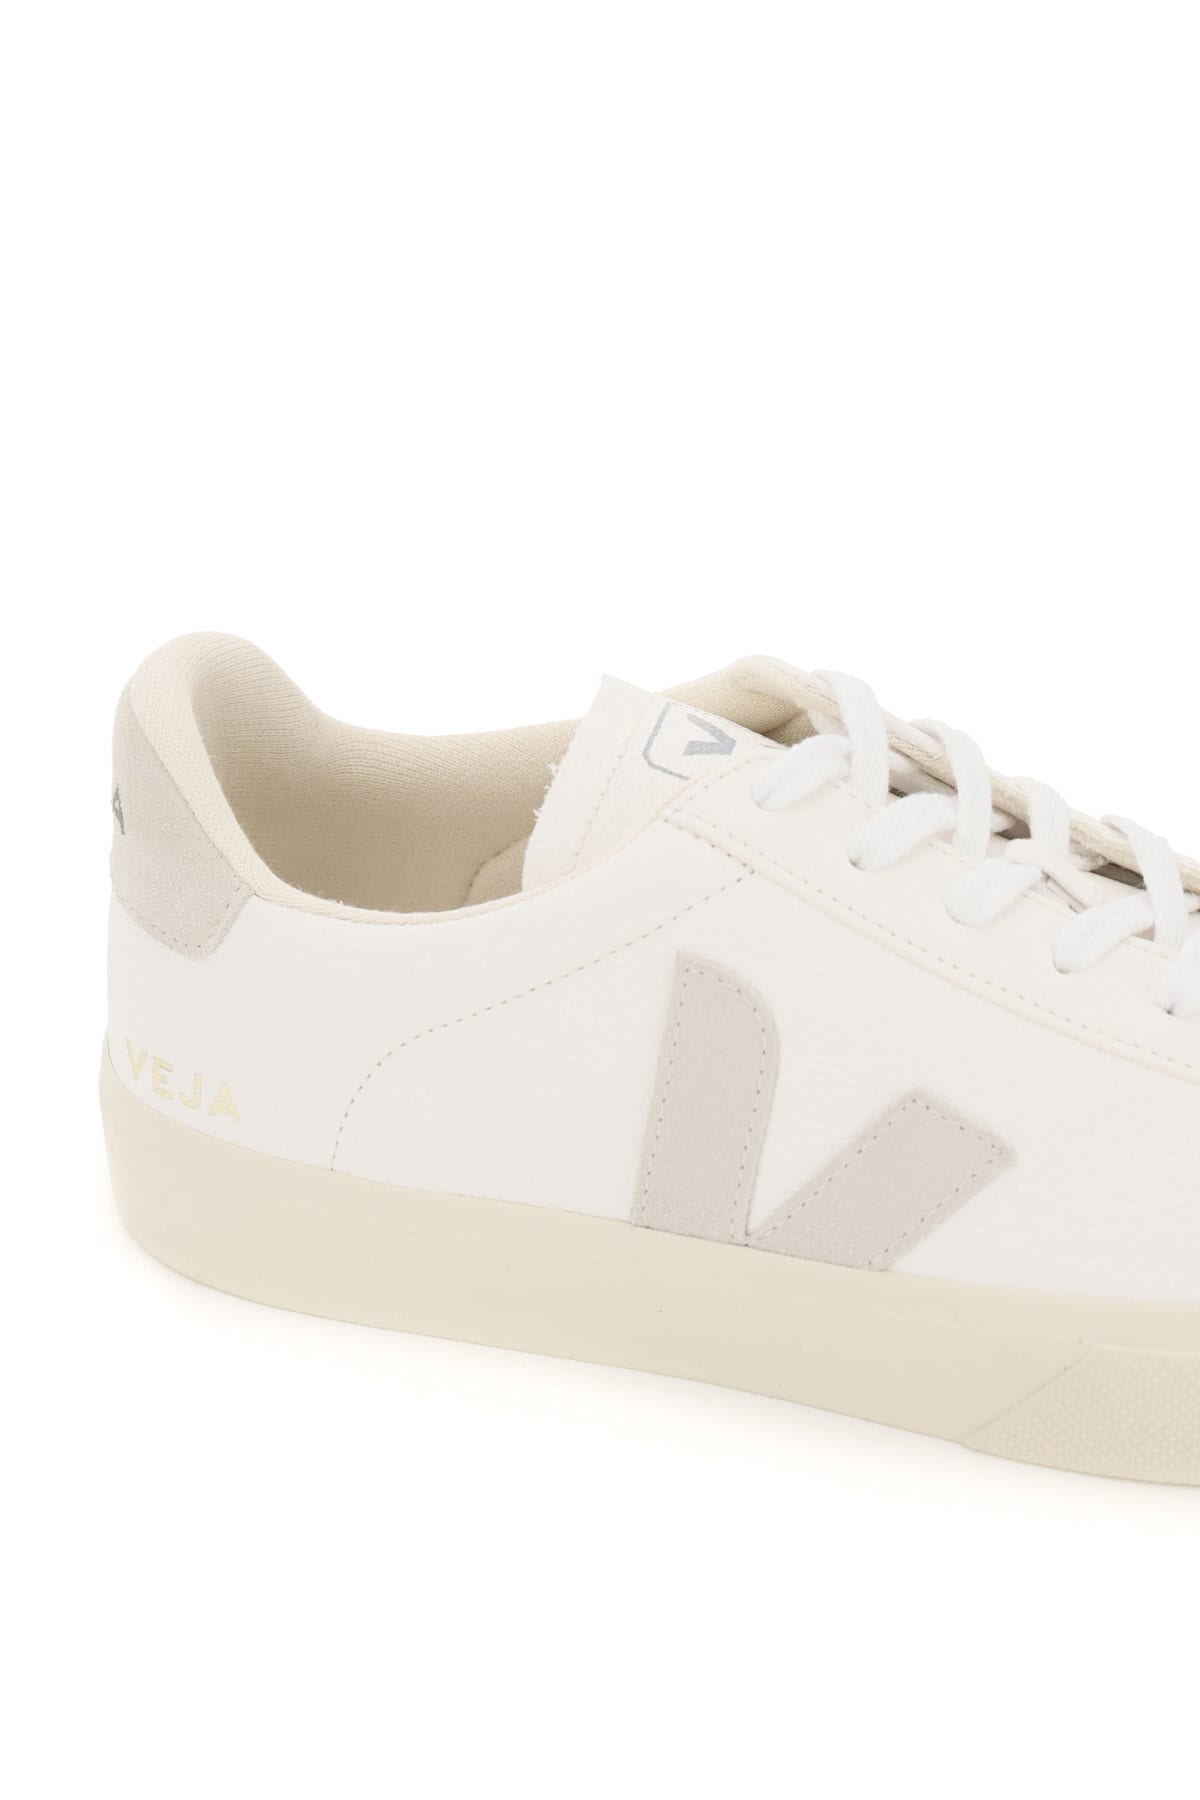 Shop Veja Campo Chromefree Leather Sneakers In Extra White Natural Suede (white)